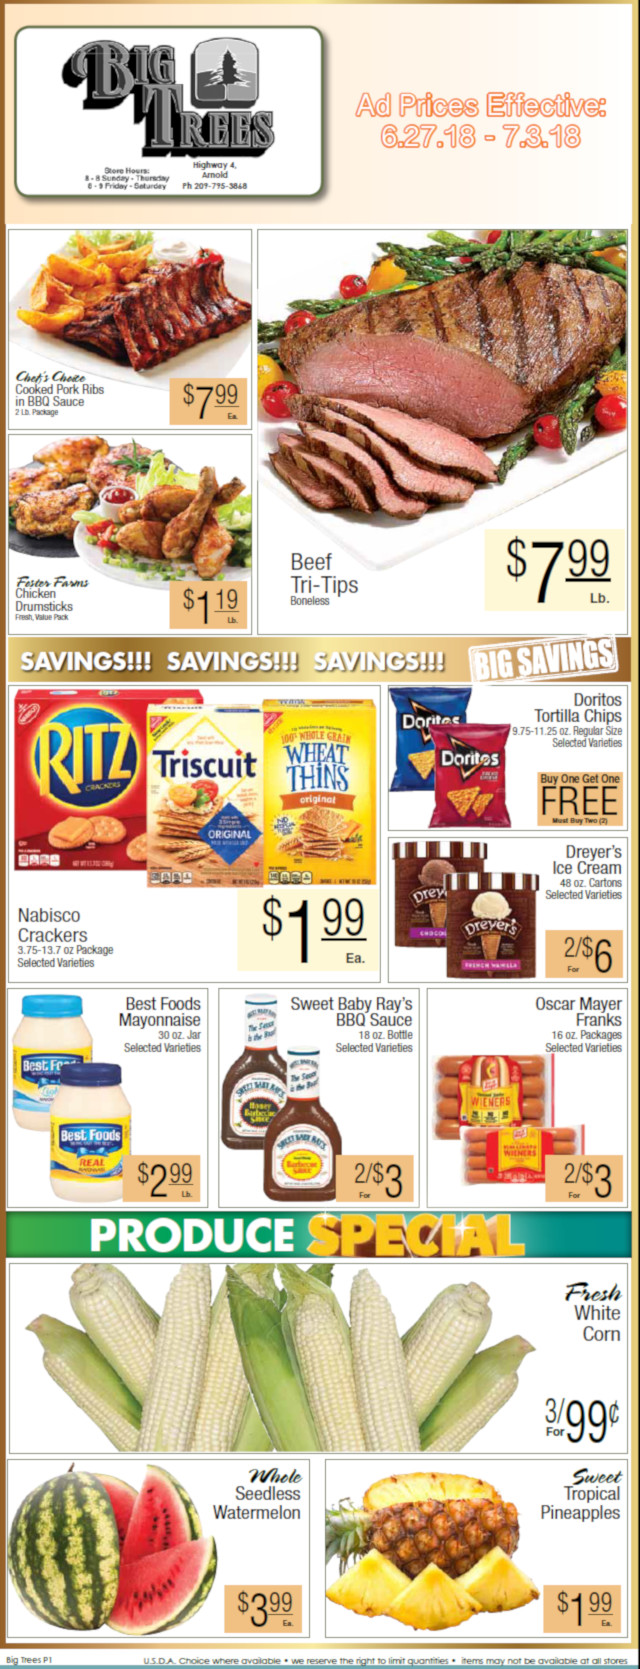 Big Trees Market Weekly Ad & Grocery Specials Through July 3rd